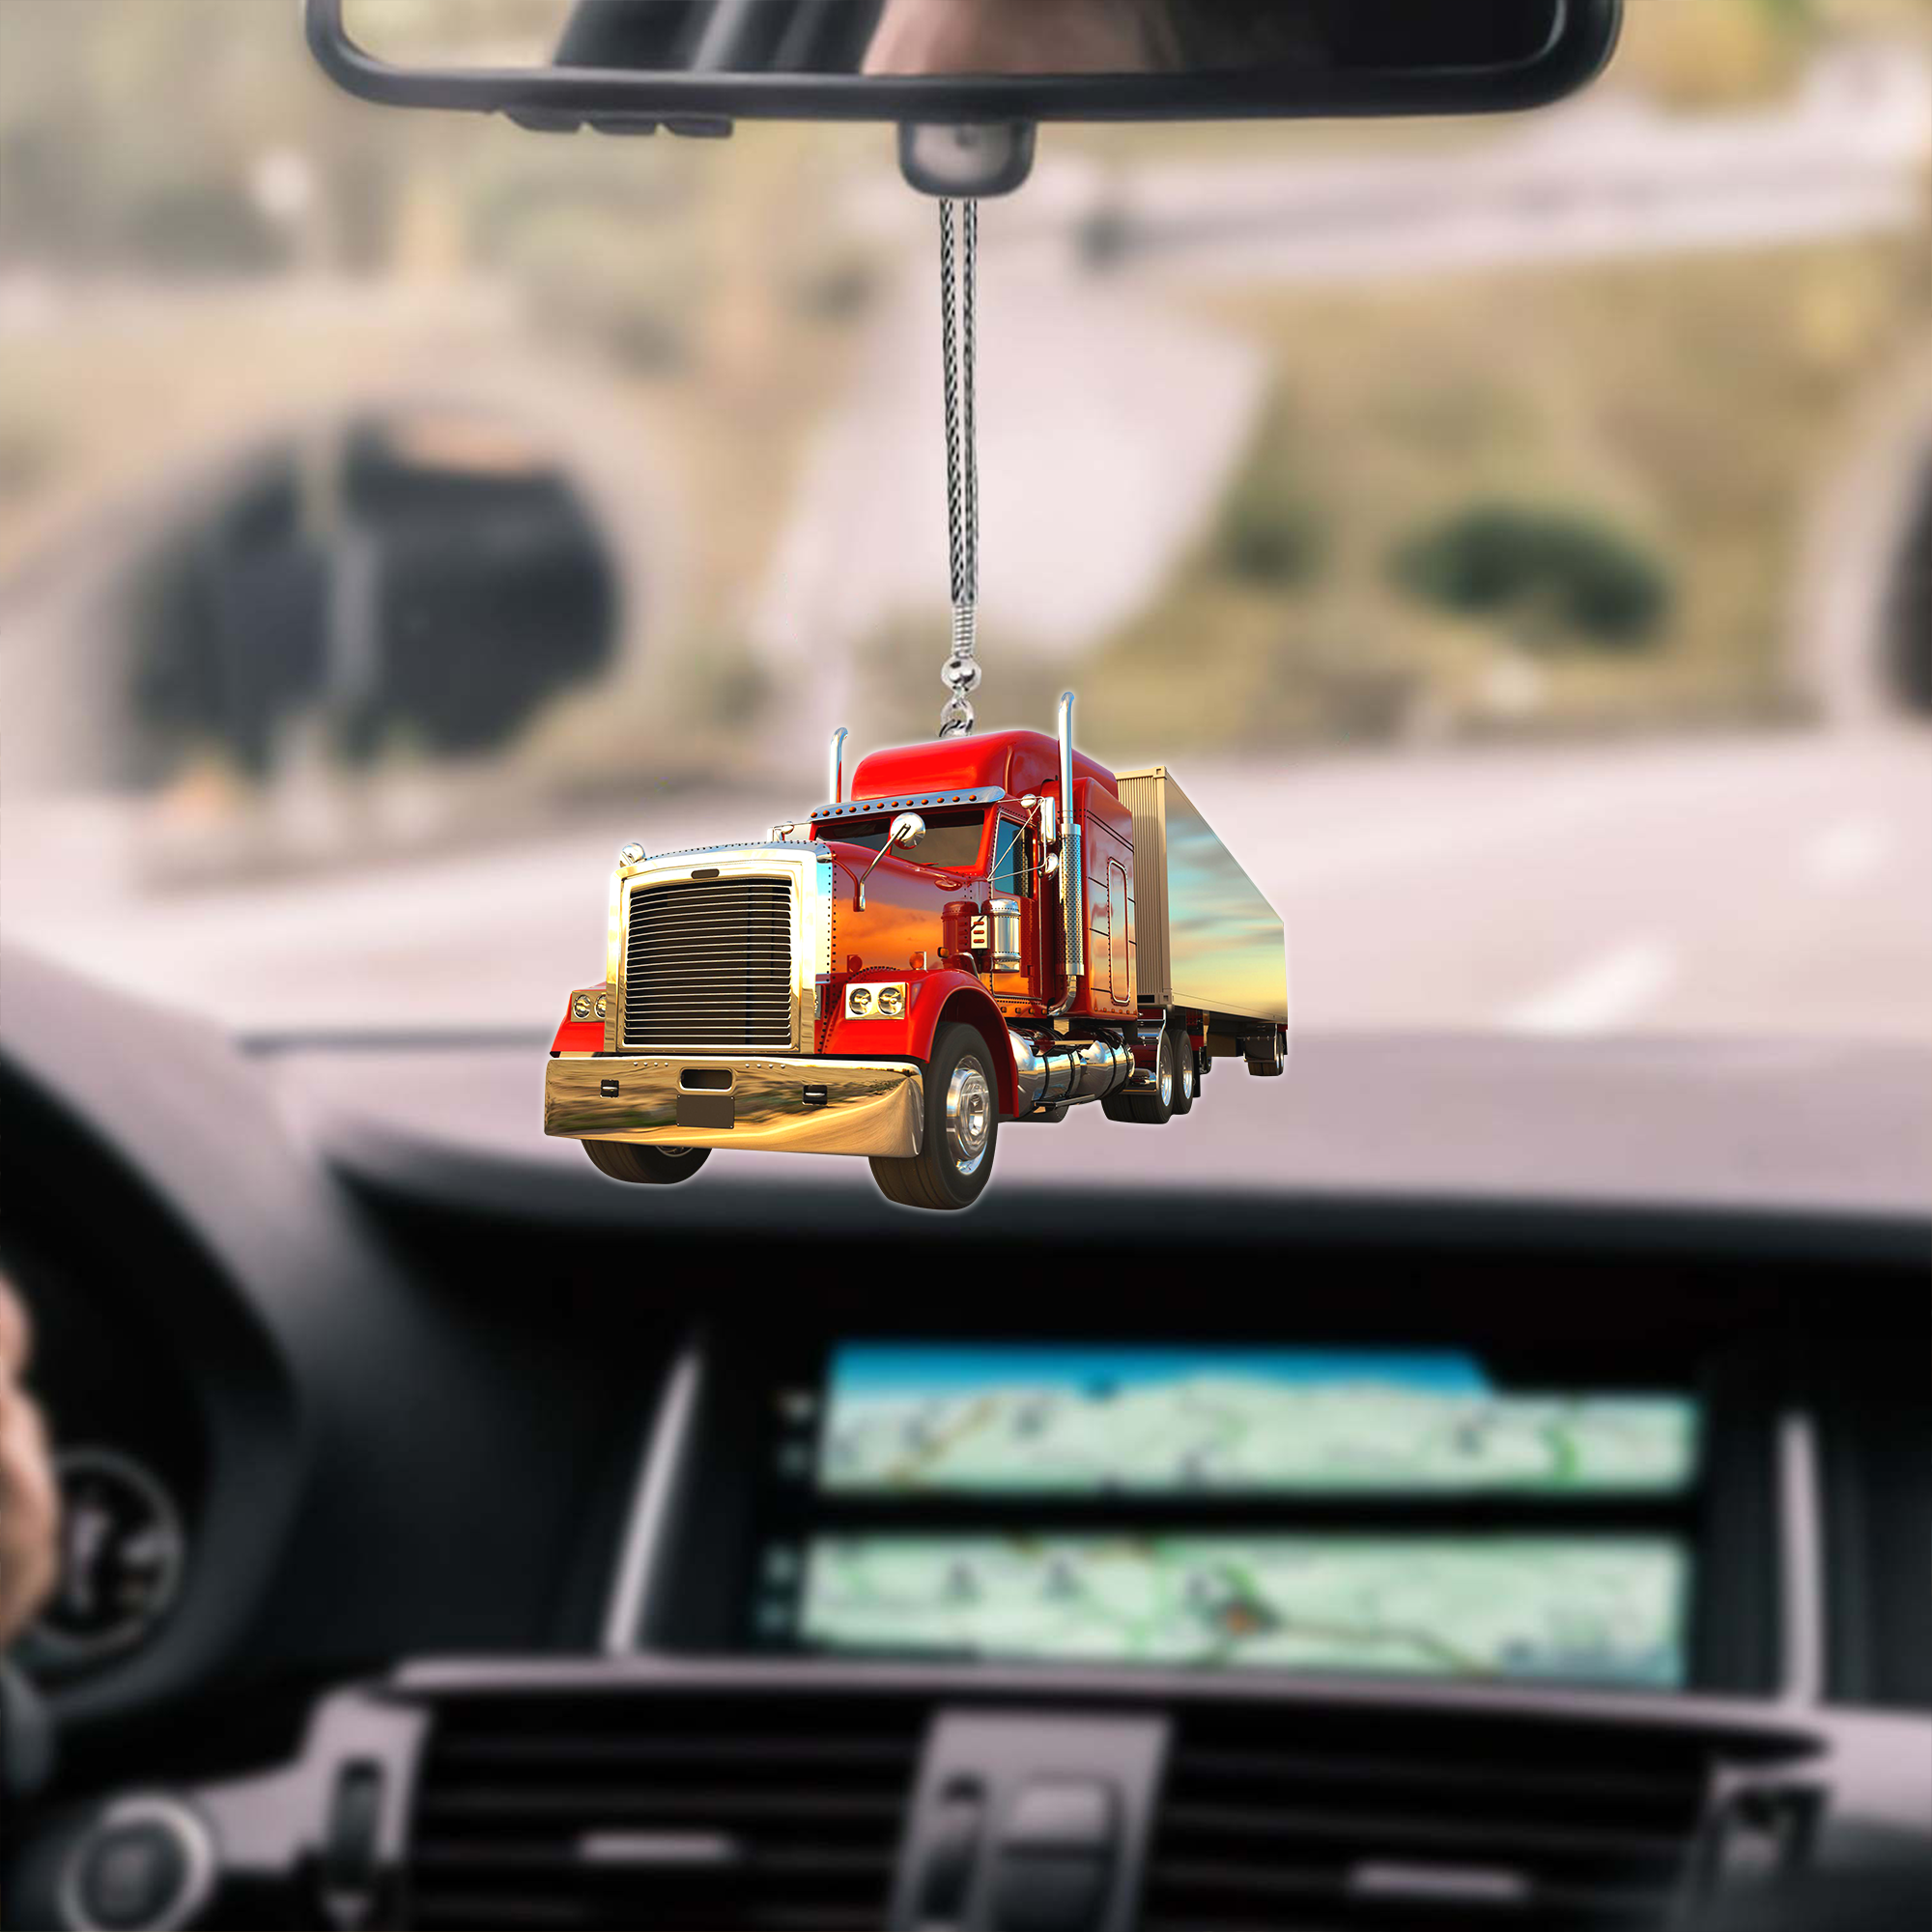 Red Truck Car Hanging Ornament Truck Ornament For Auto